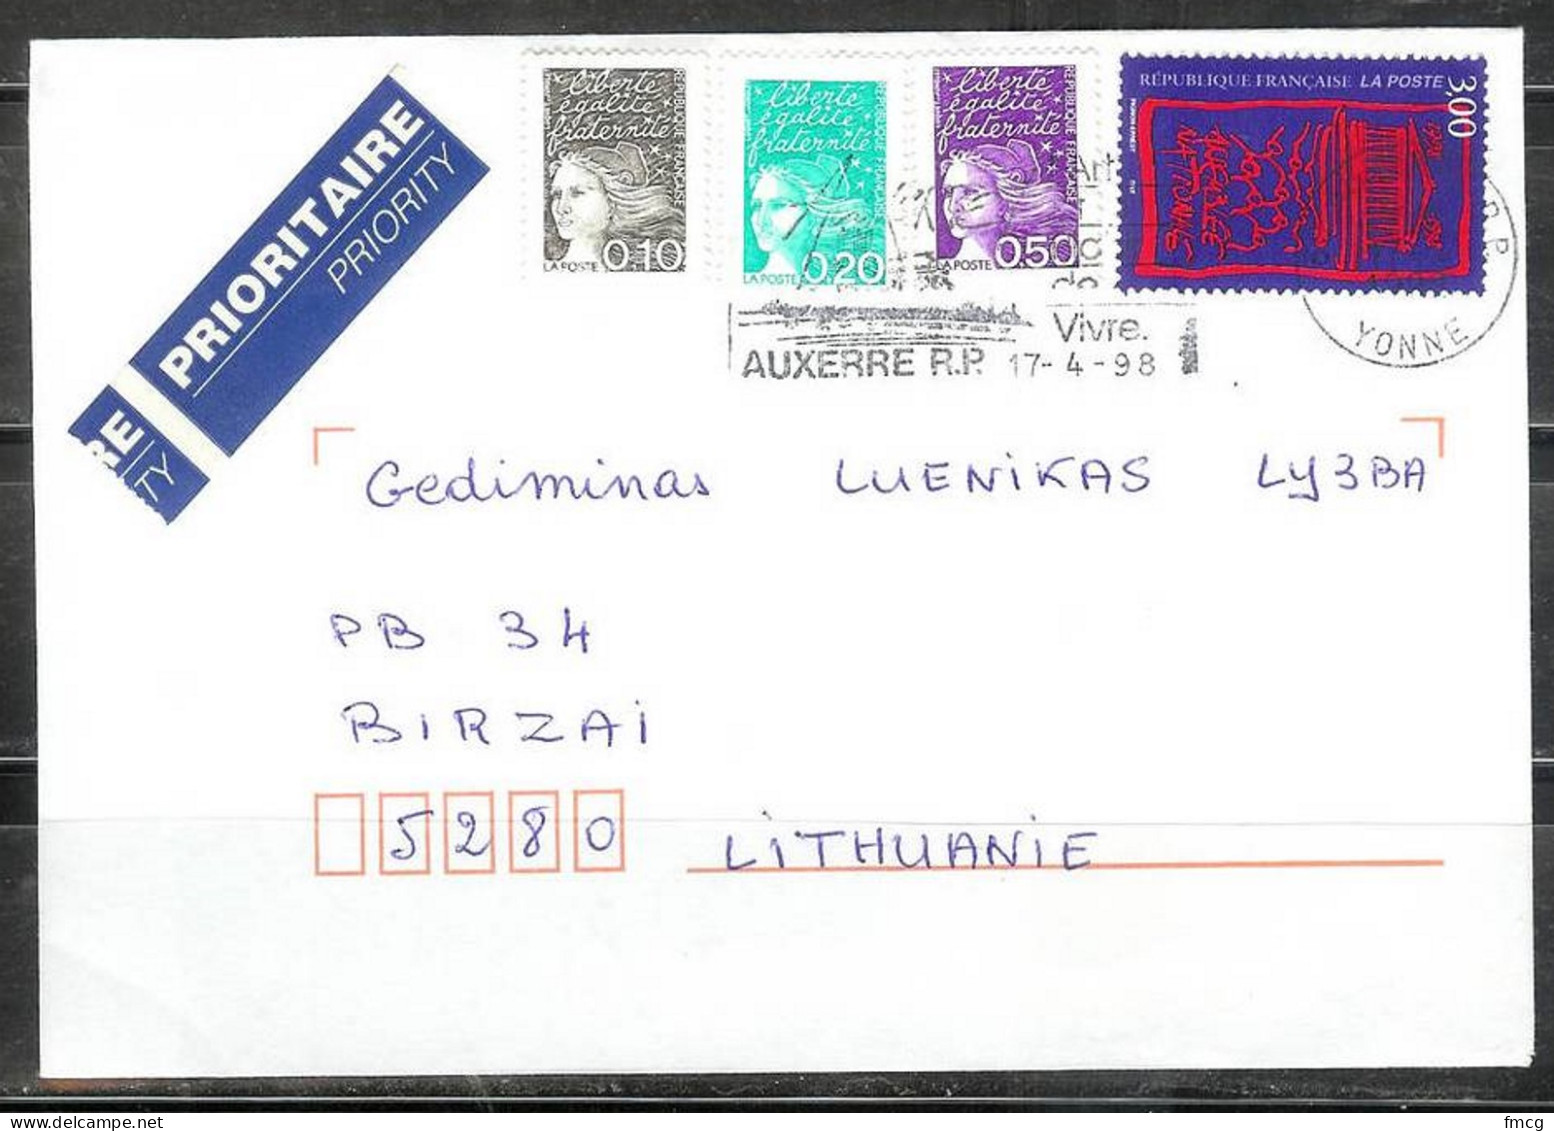  1998 National Assembly, Auxerre (17-4-98) To Lithuania - Brieven En Documenten